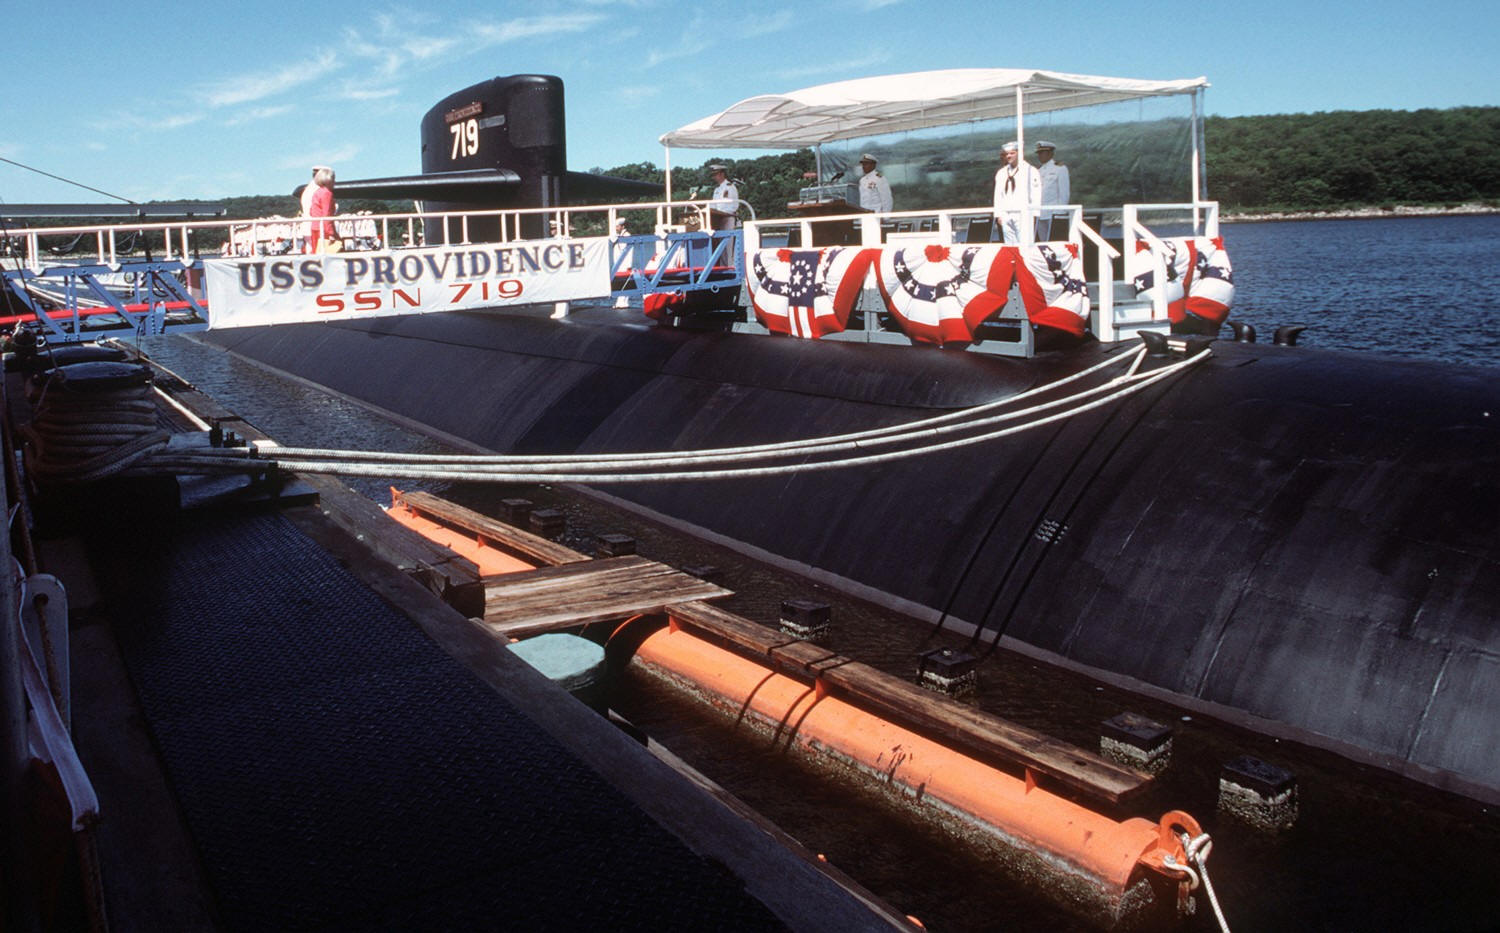 ssn-719 uss providence commissioning ceremony july 1985